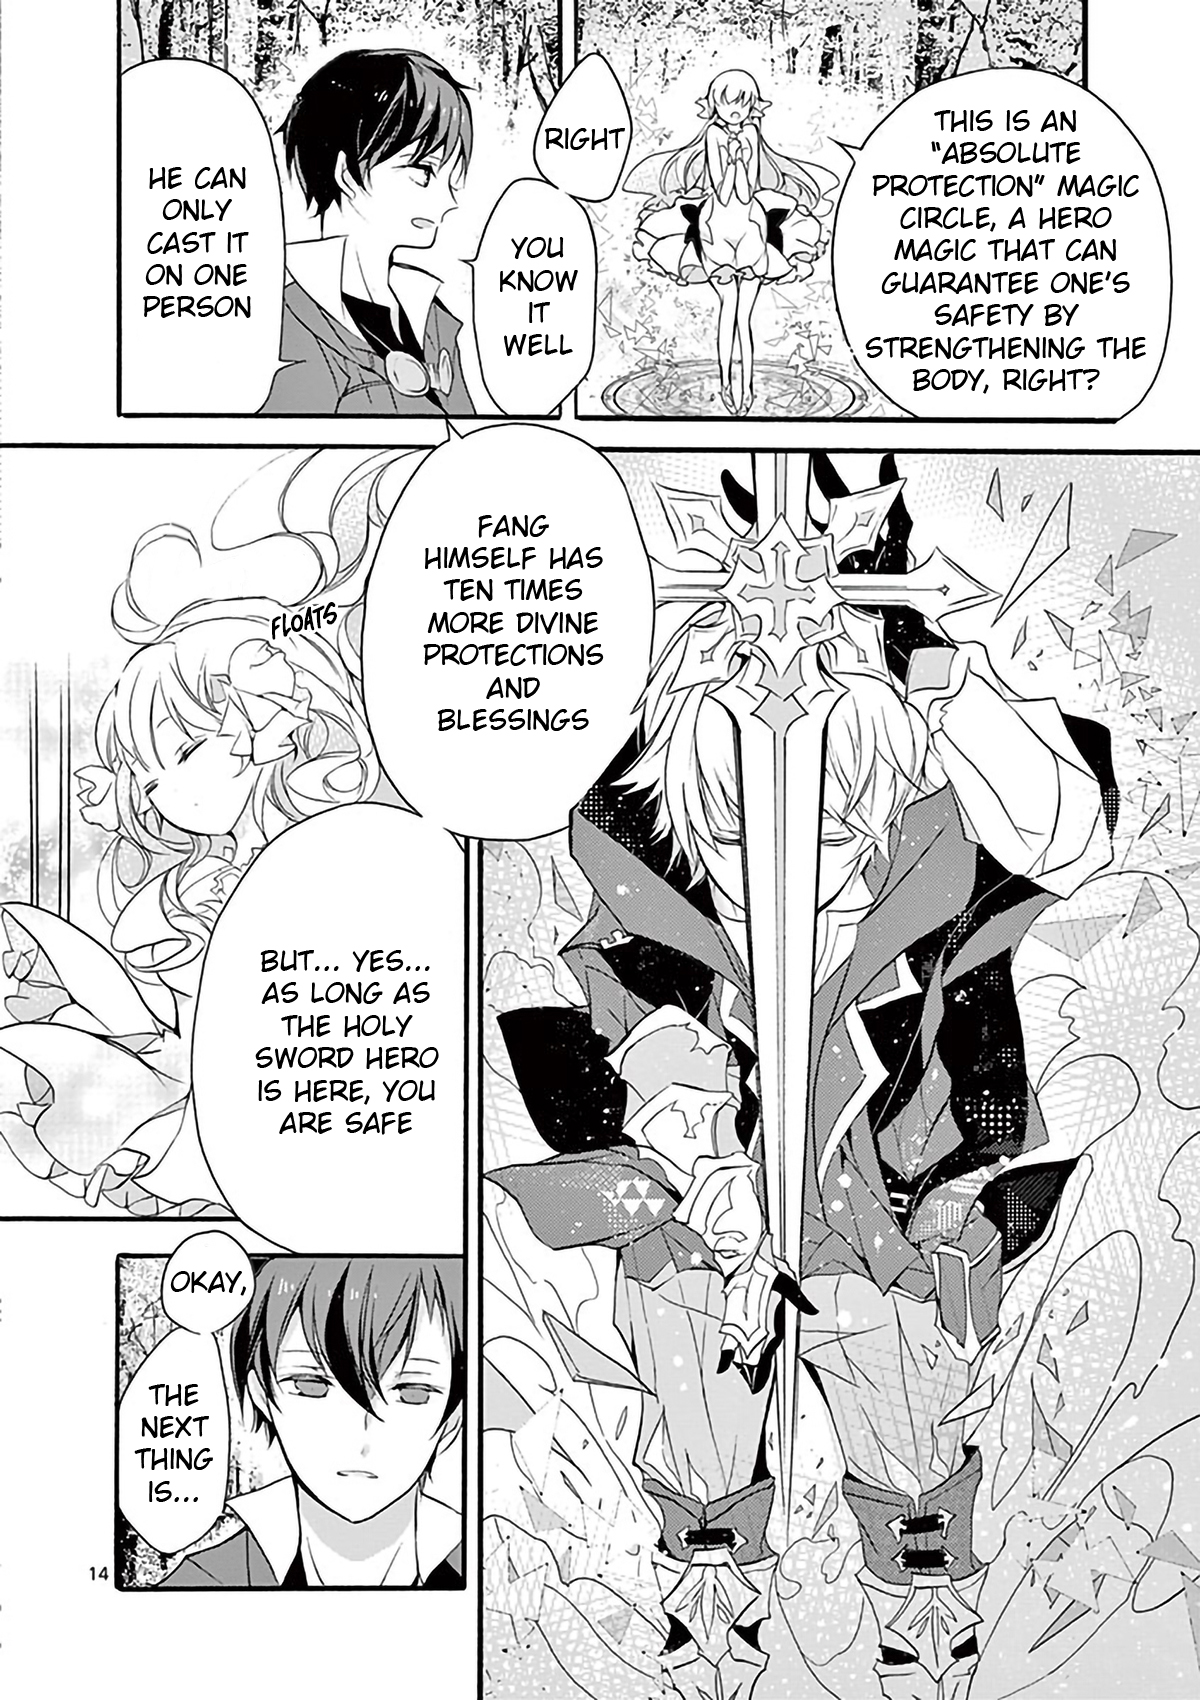 I went from the strongest job, <Dragon Knight>, to a beginner level job, <Carrier>, yet for some reason the Heroes rely on me Vol. 1 Ch. 3